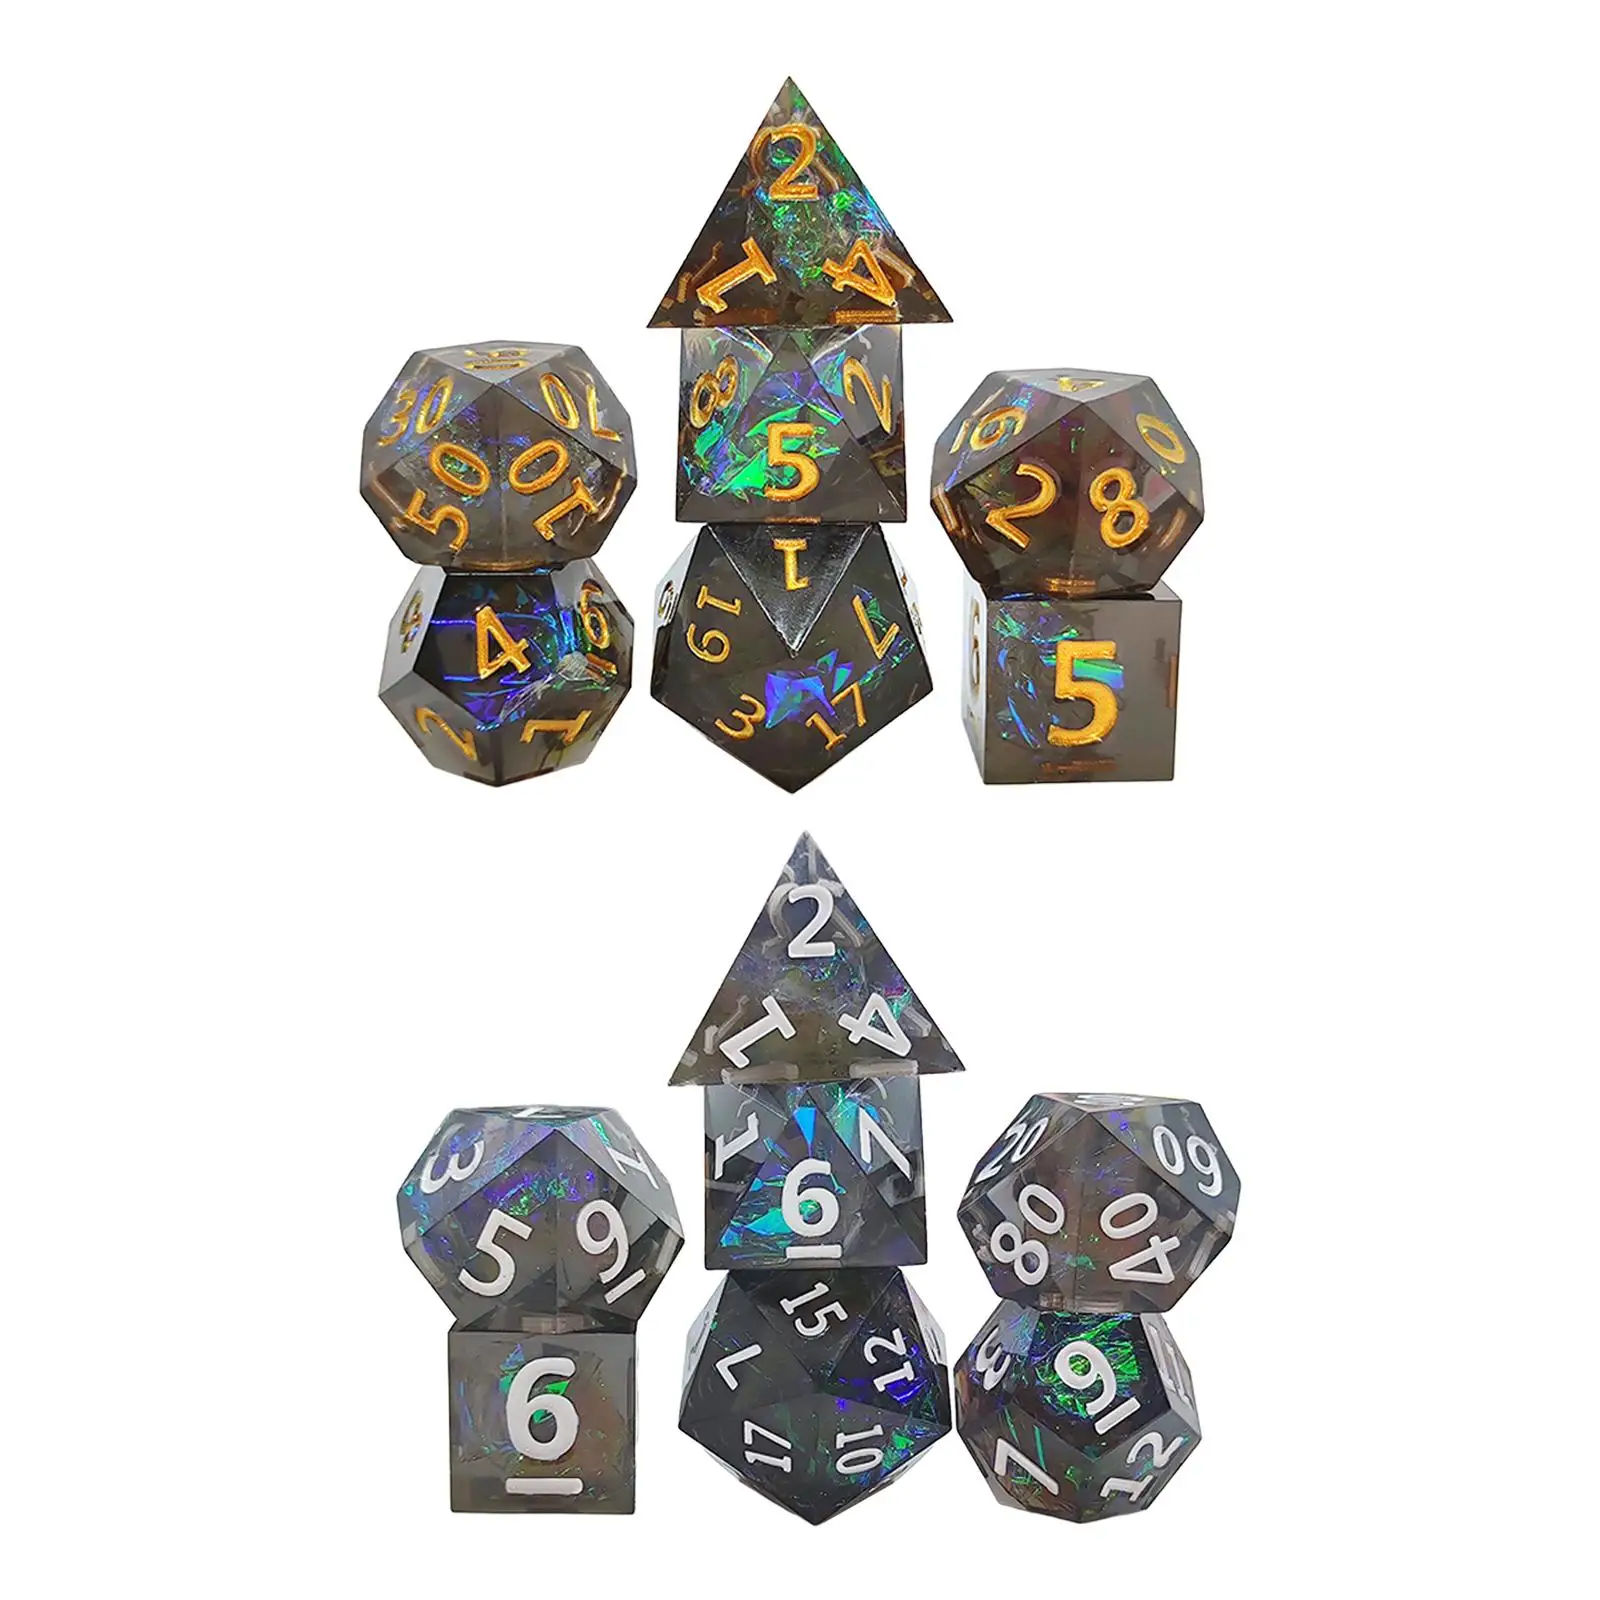 Durable Dice Practical Portable 1 Set Set Kit RPG DND Board Games 7 Polyhedral 